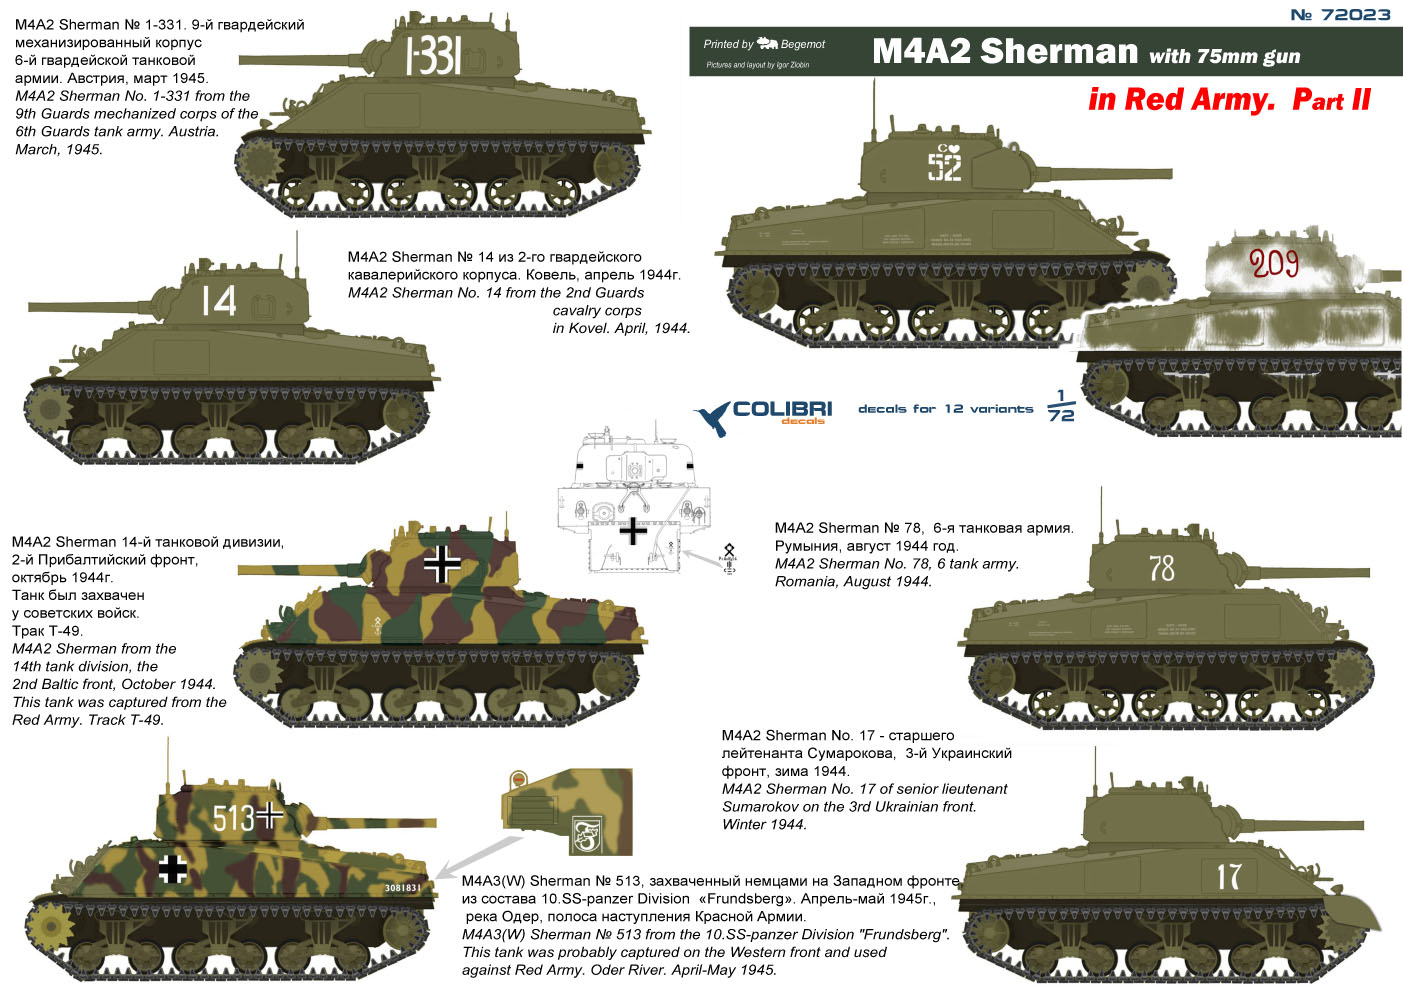 Decal 1/72 M4A2 Sherman in Red Army Part II (Colibri Decals)